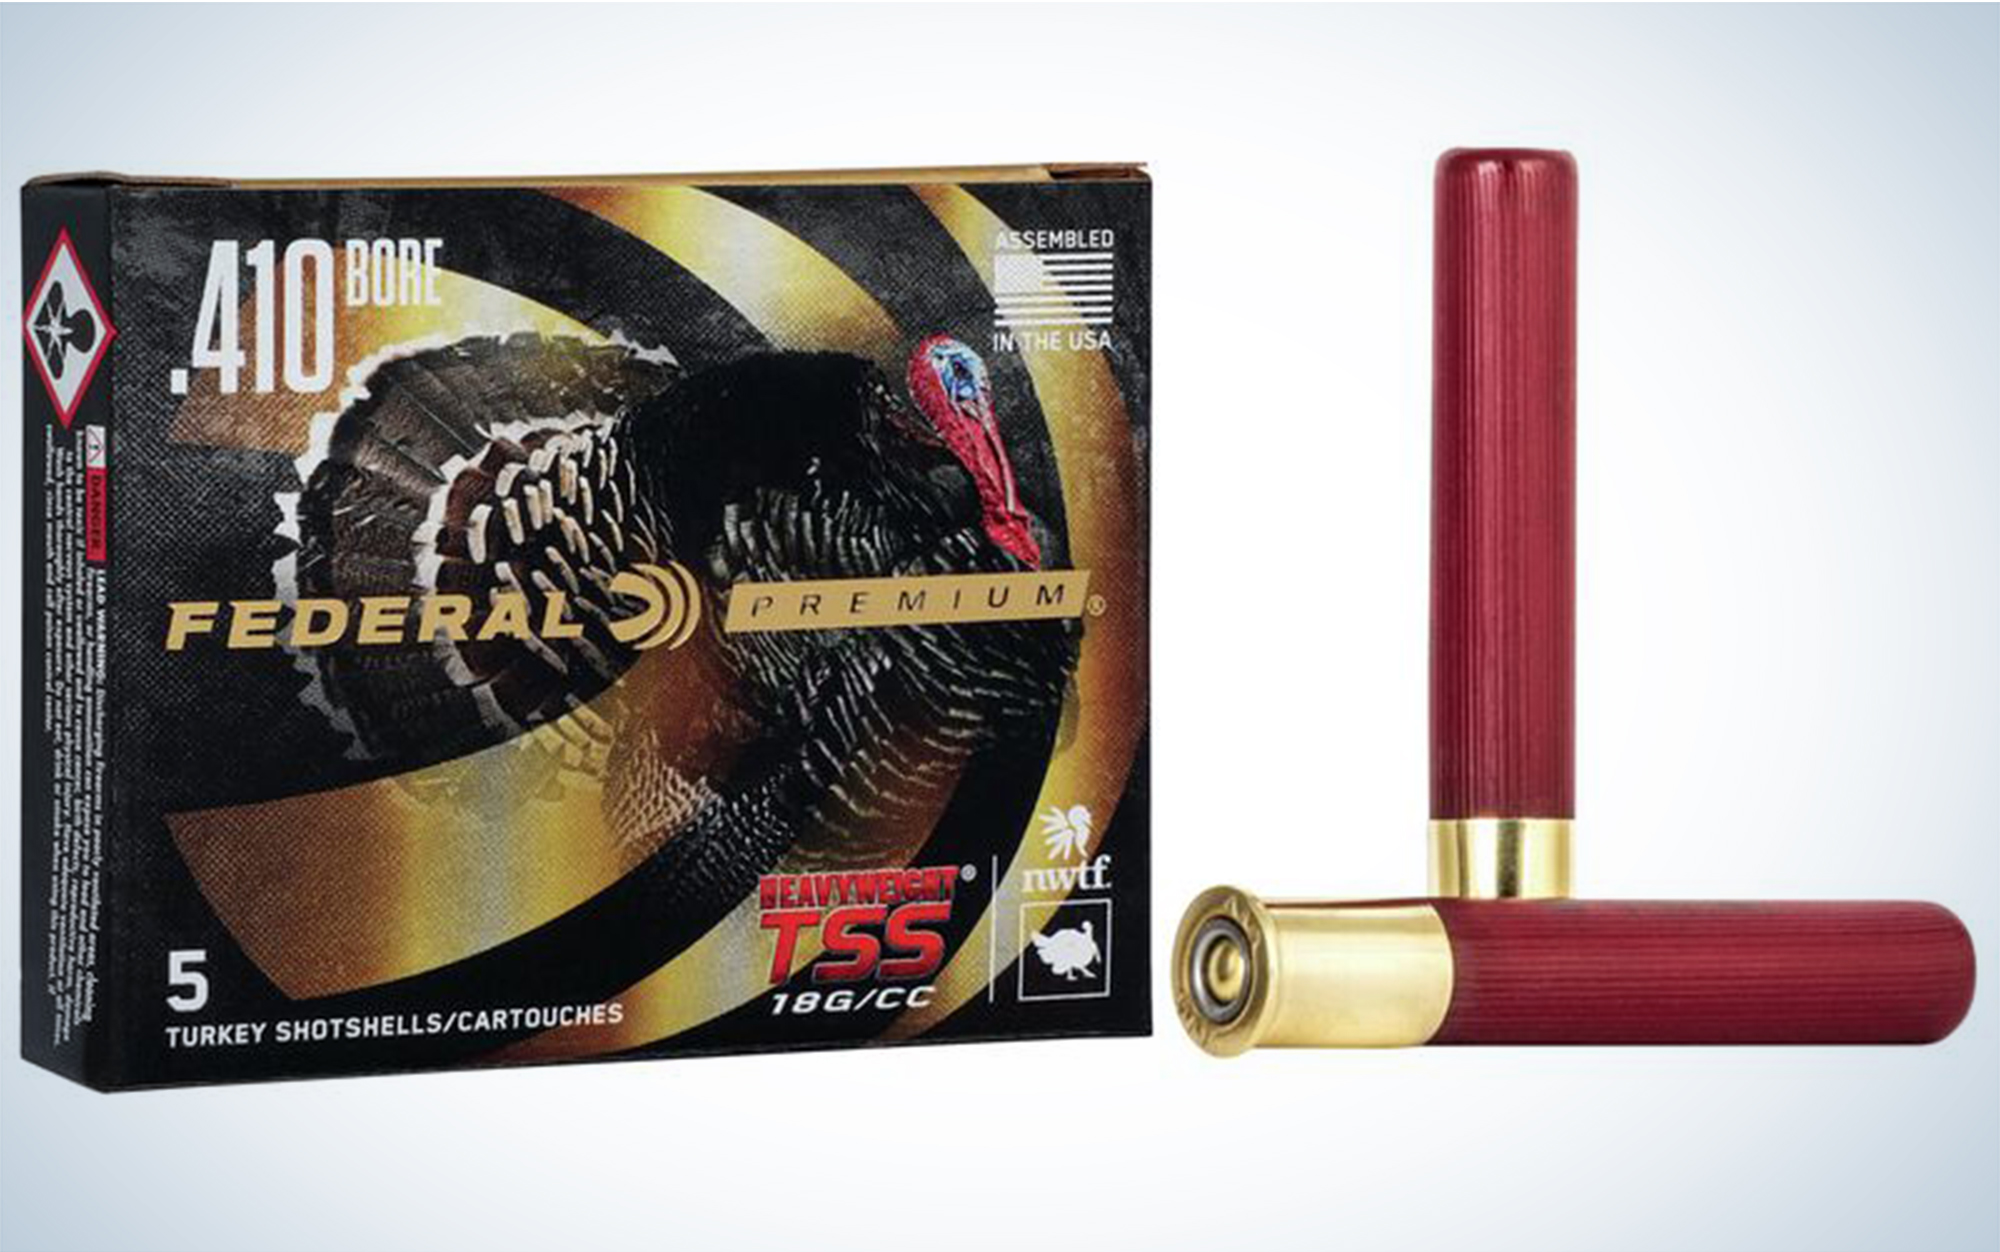 The Federal Heavyweight are one of the best .410 turkey loads.